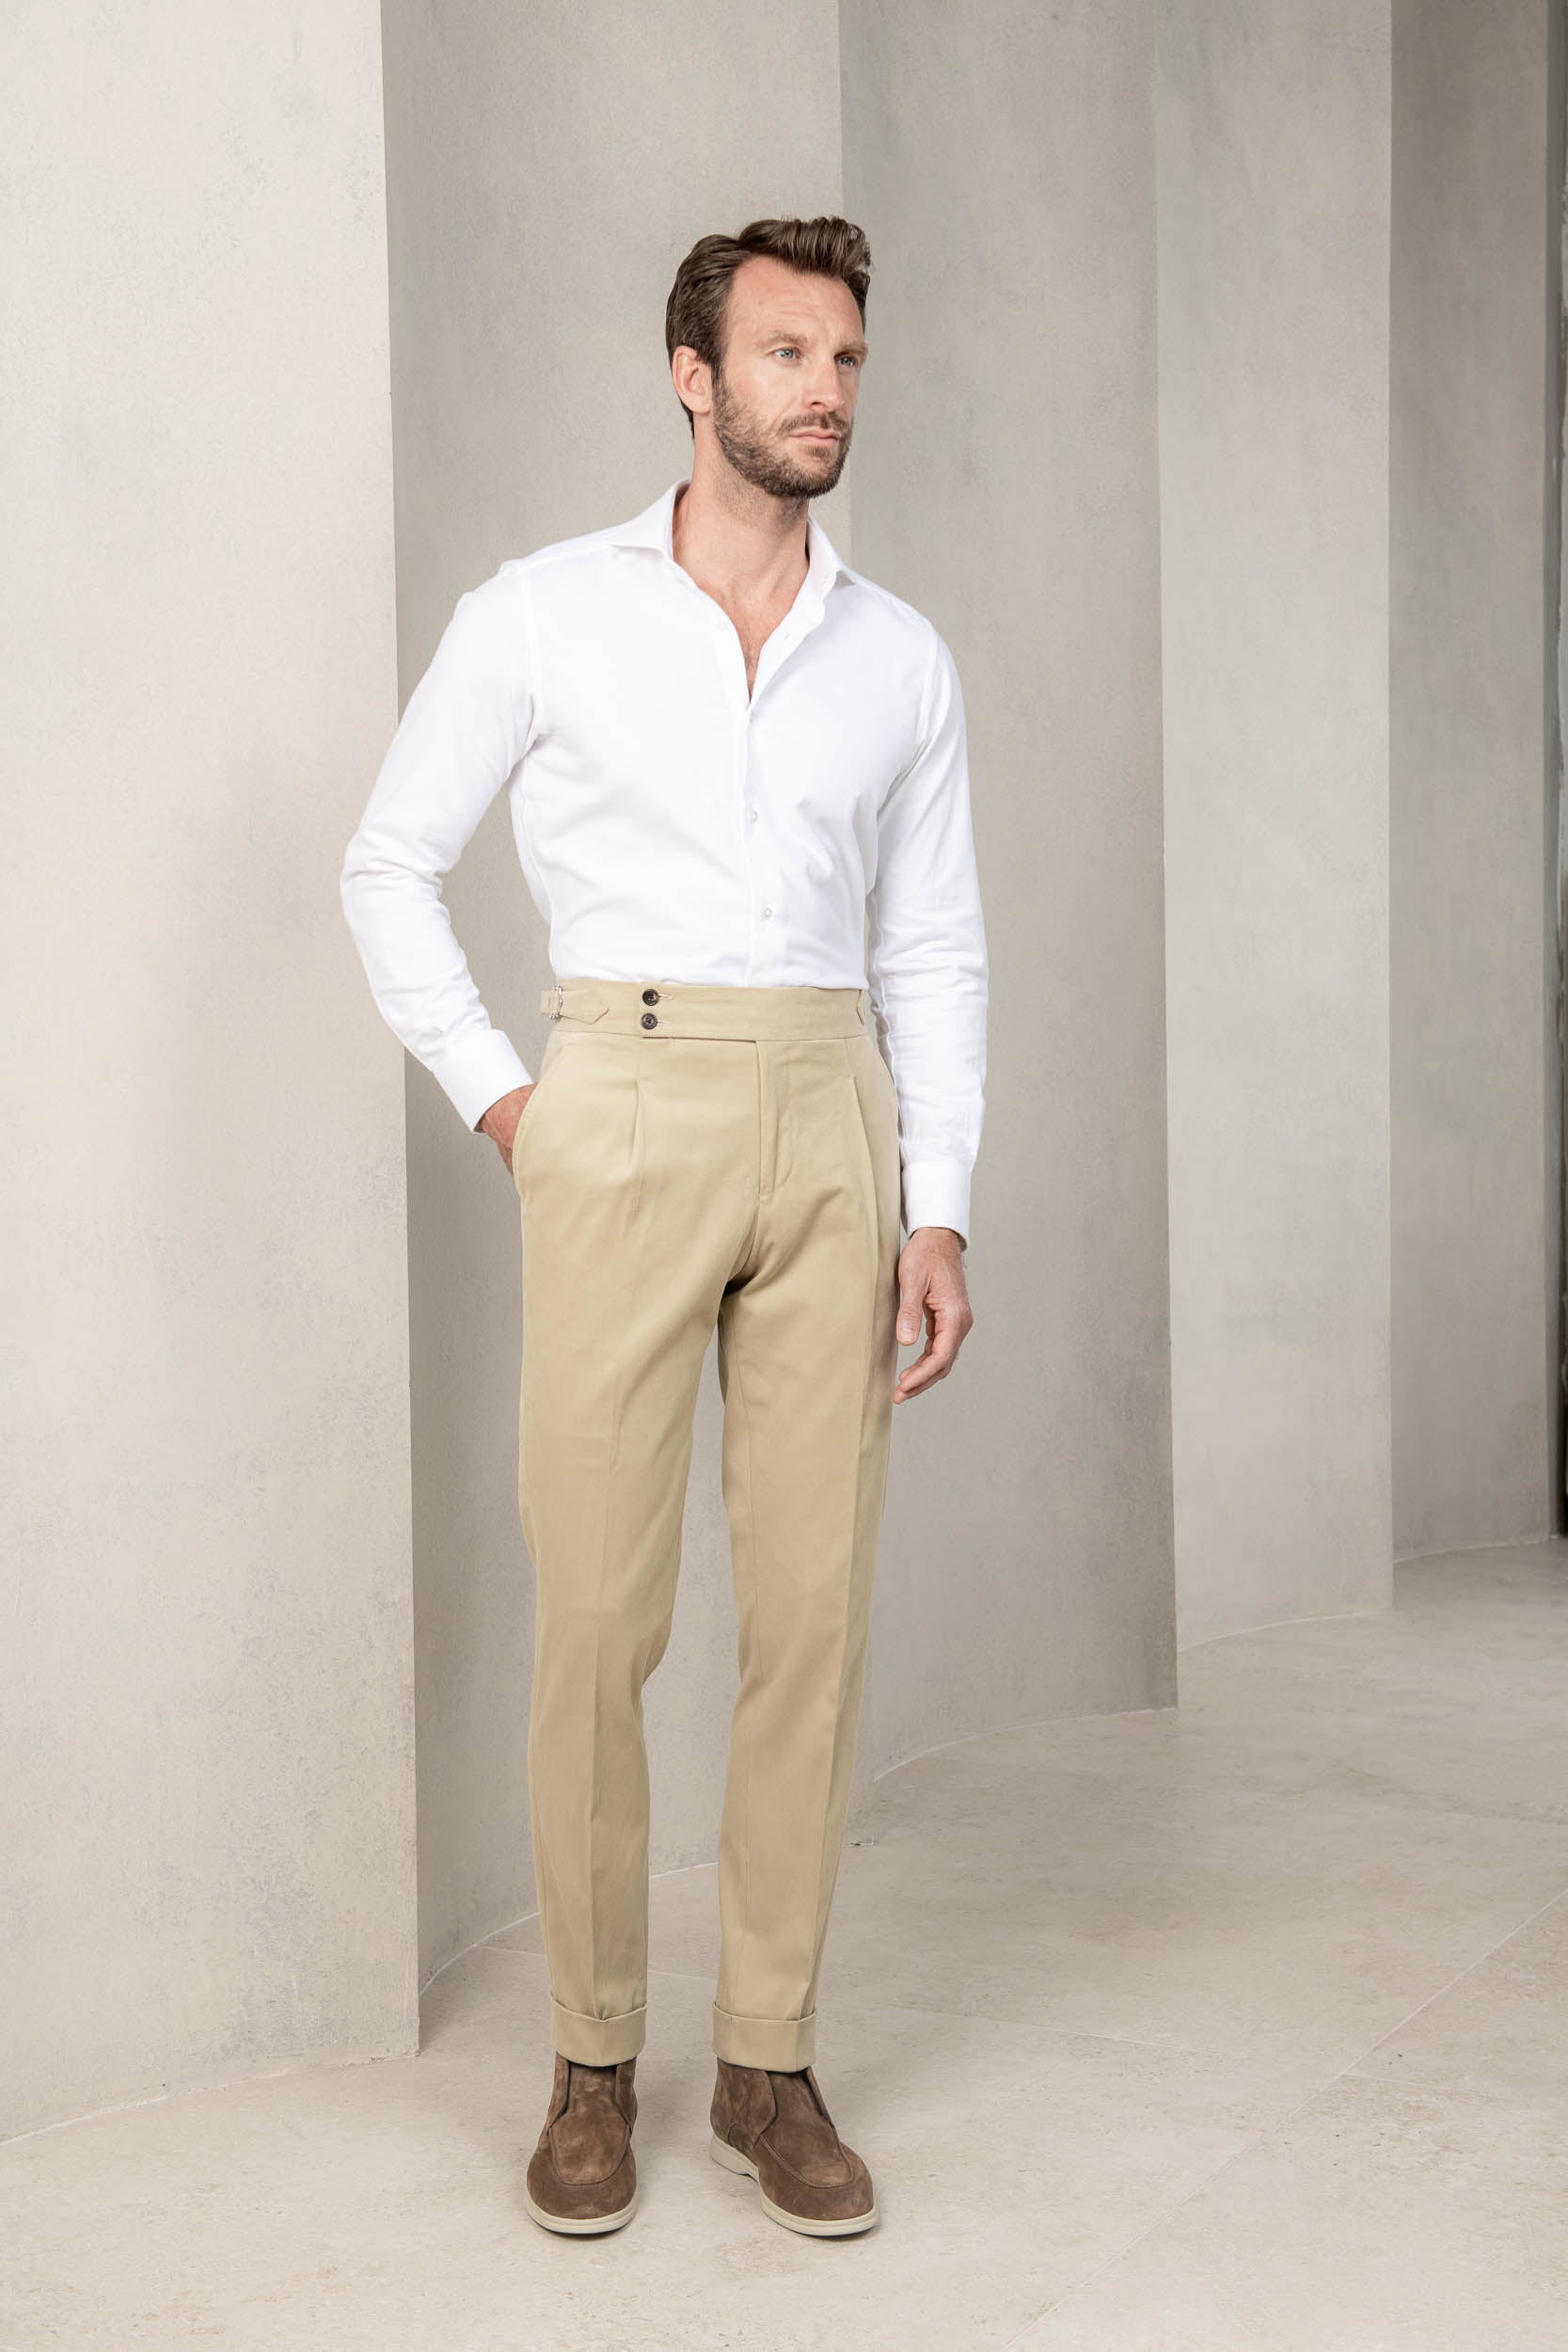 Beige cotton trousers Soragna Capsule Collection - Made in Italy